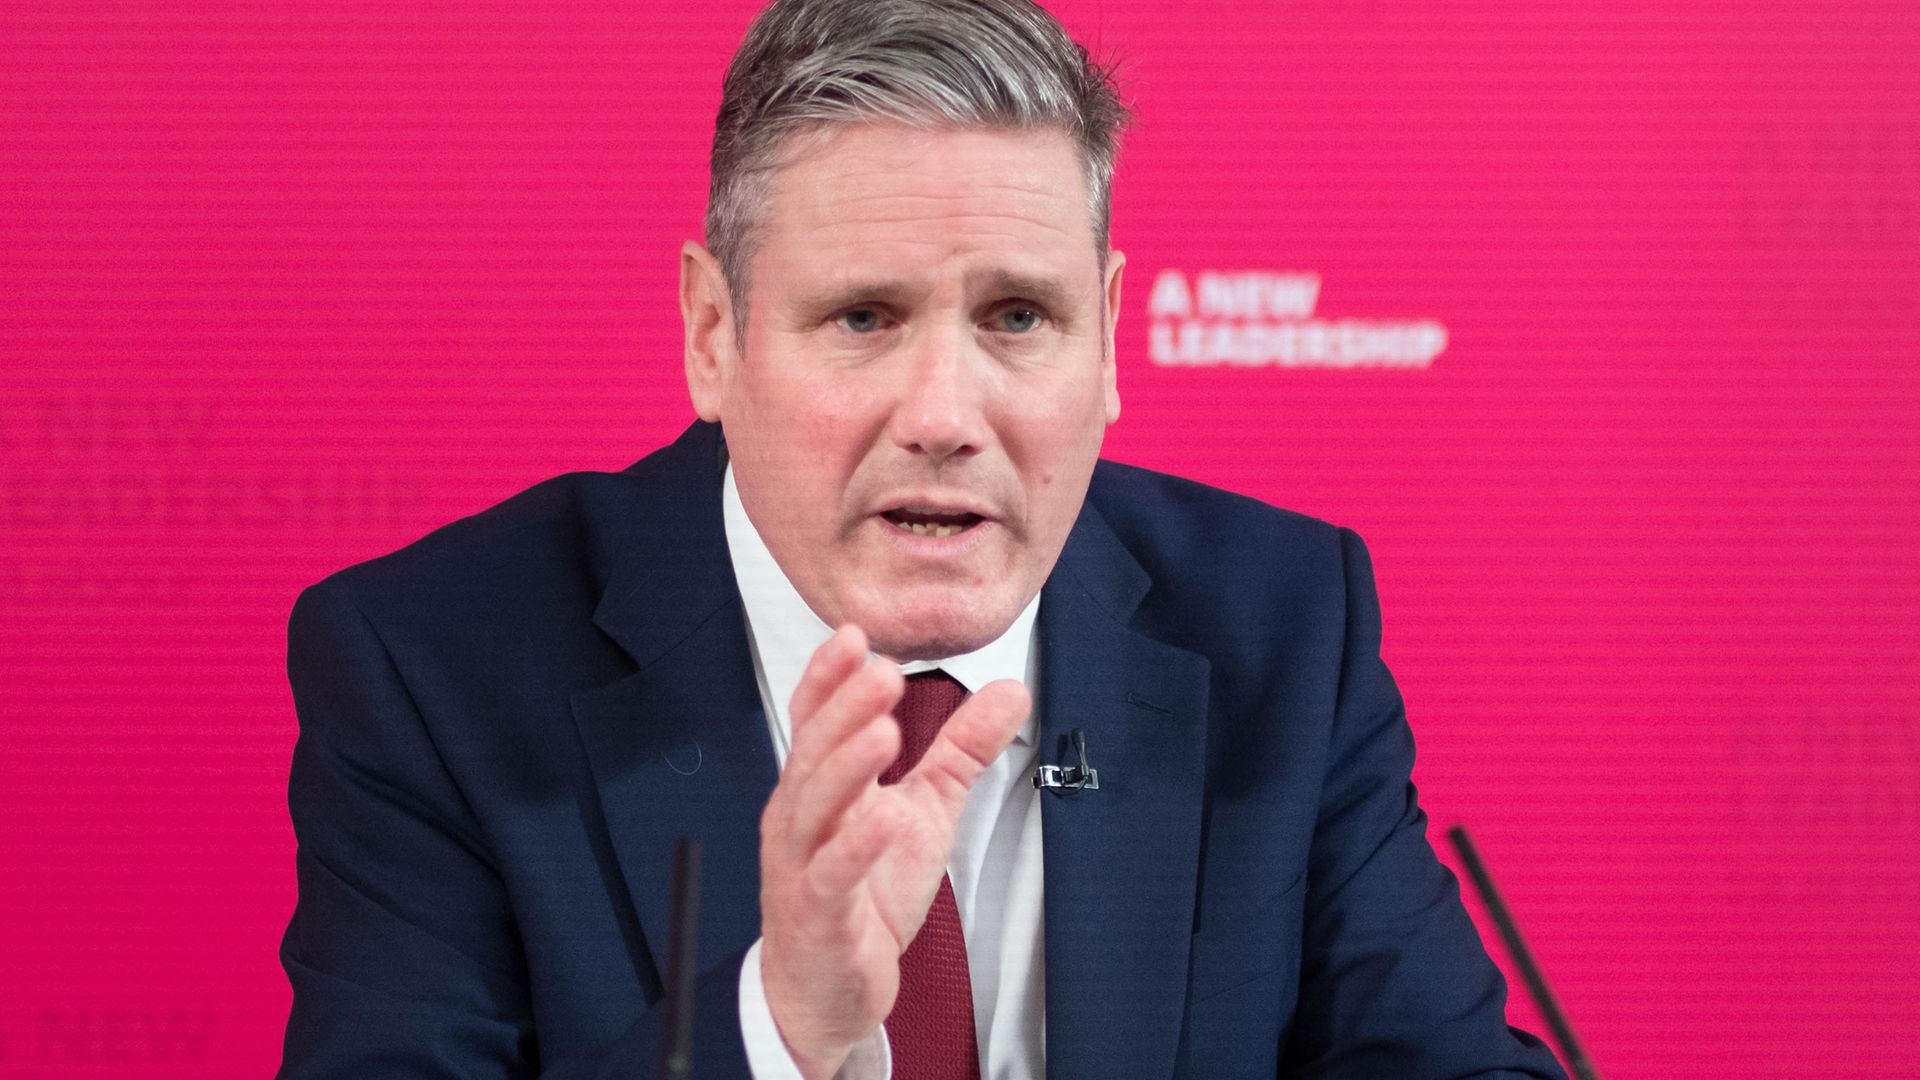 Labour leader Sir Keir Starmer delivers a virtual speech. Photo: PA Images.